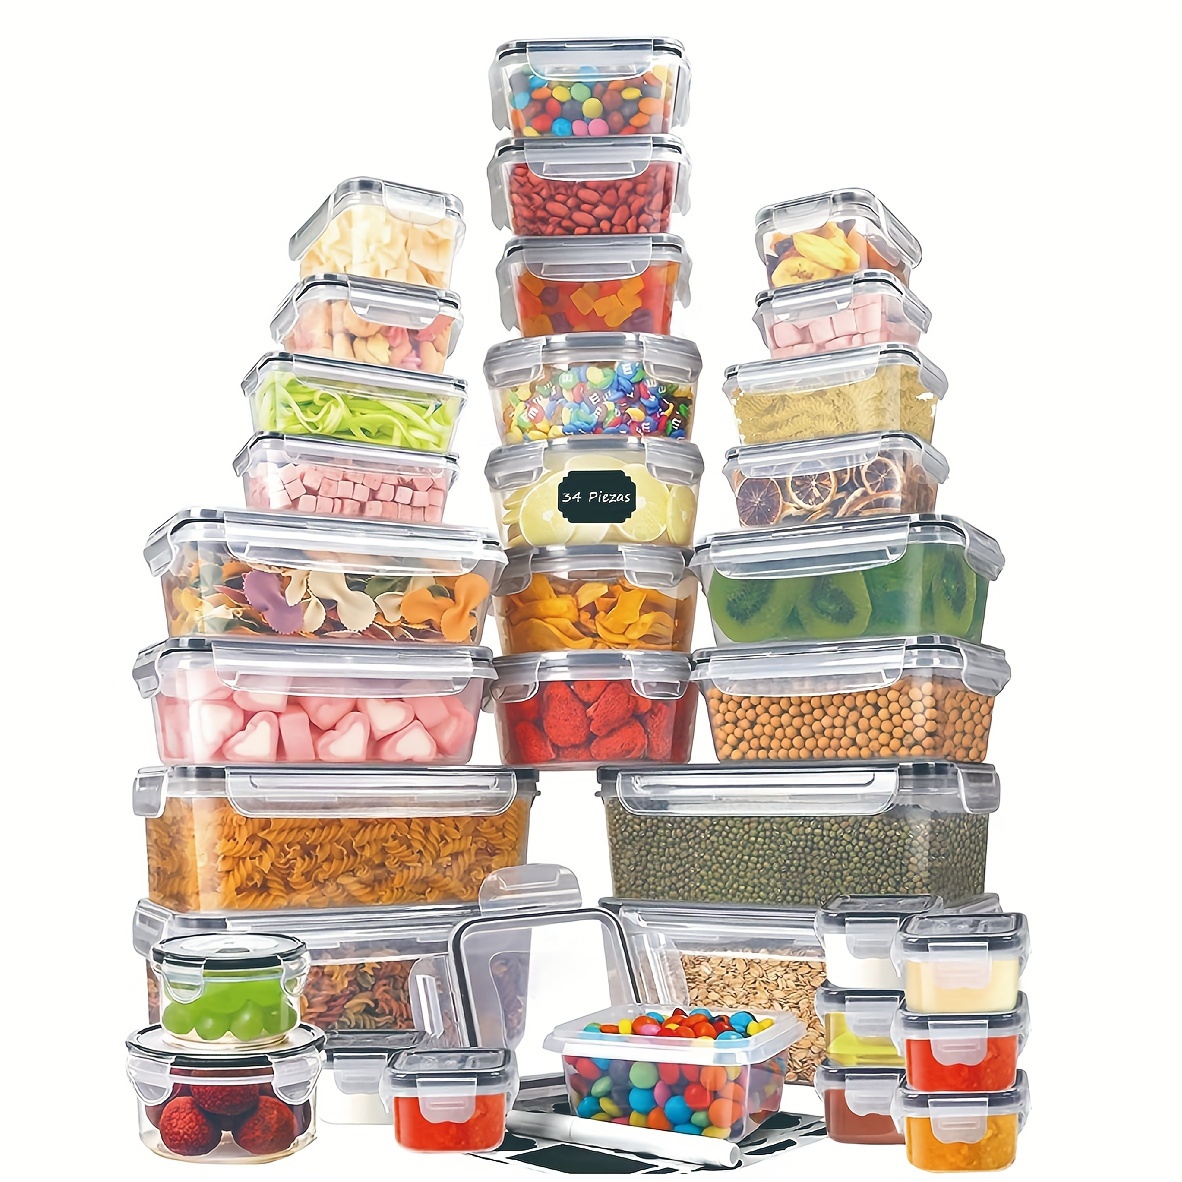 

34-piece Refrigerator Storage Container Set - Microwave Safe, Reusable Plastic Freshness Boxes With Lids For Fruits, Vegetables & Meats - Kitchen Organization Essentials